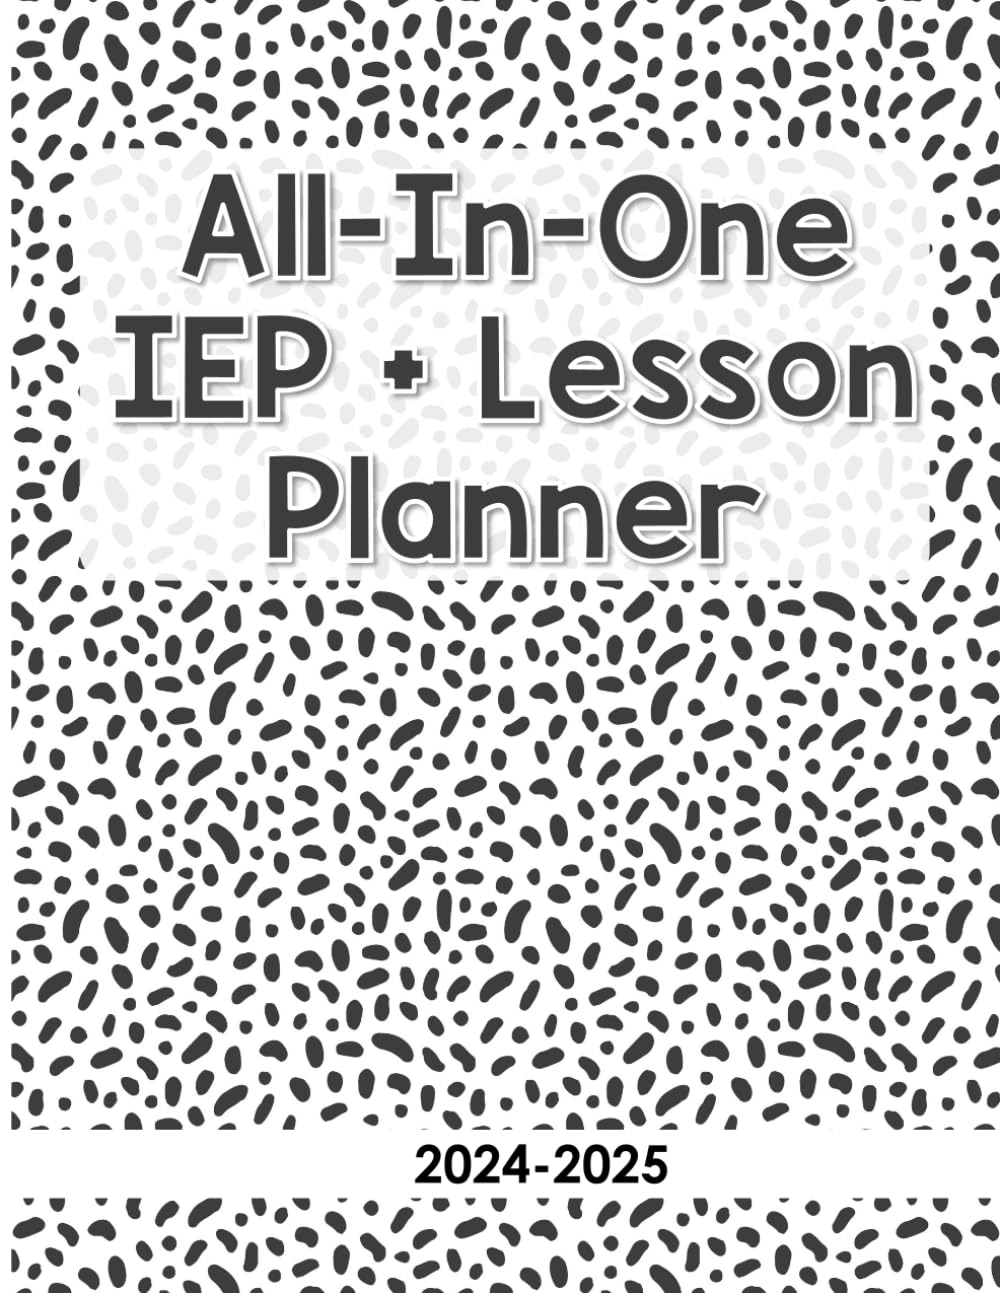 IEP Planner: The Special Educator's All-in-One IEP Lesson Planner [ Black and White ]